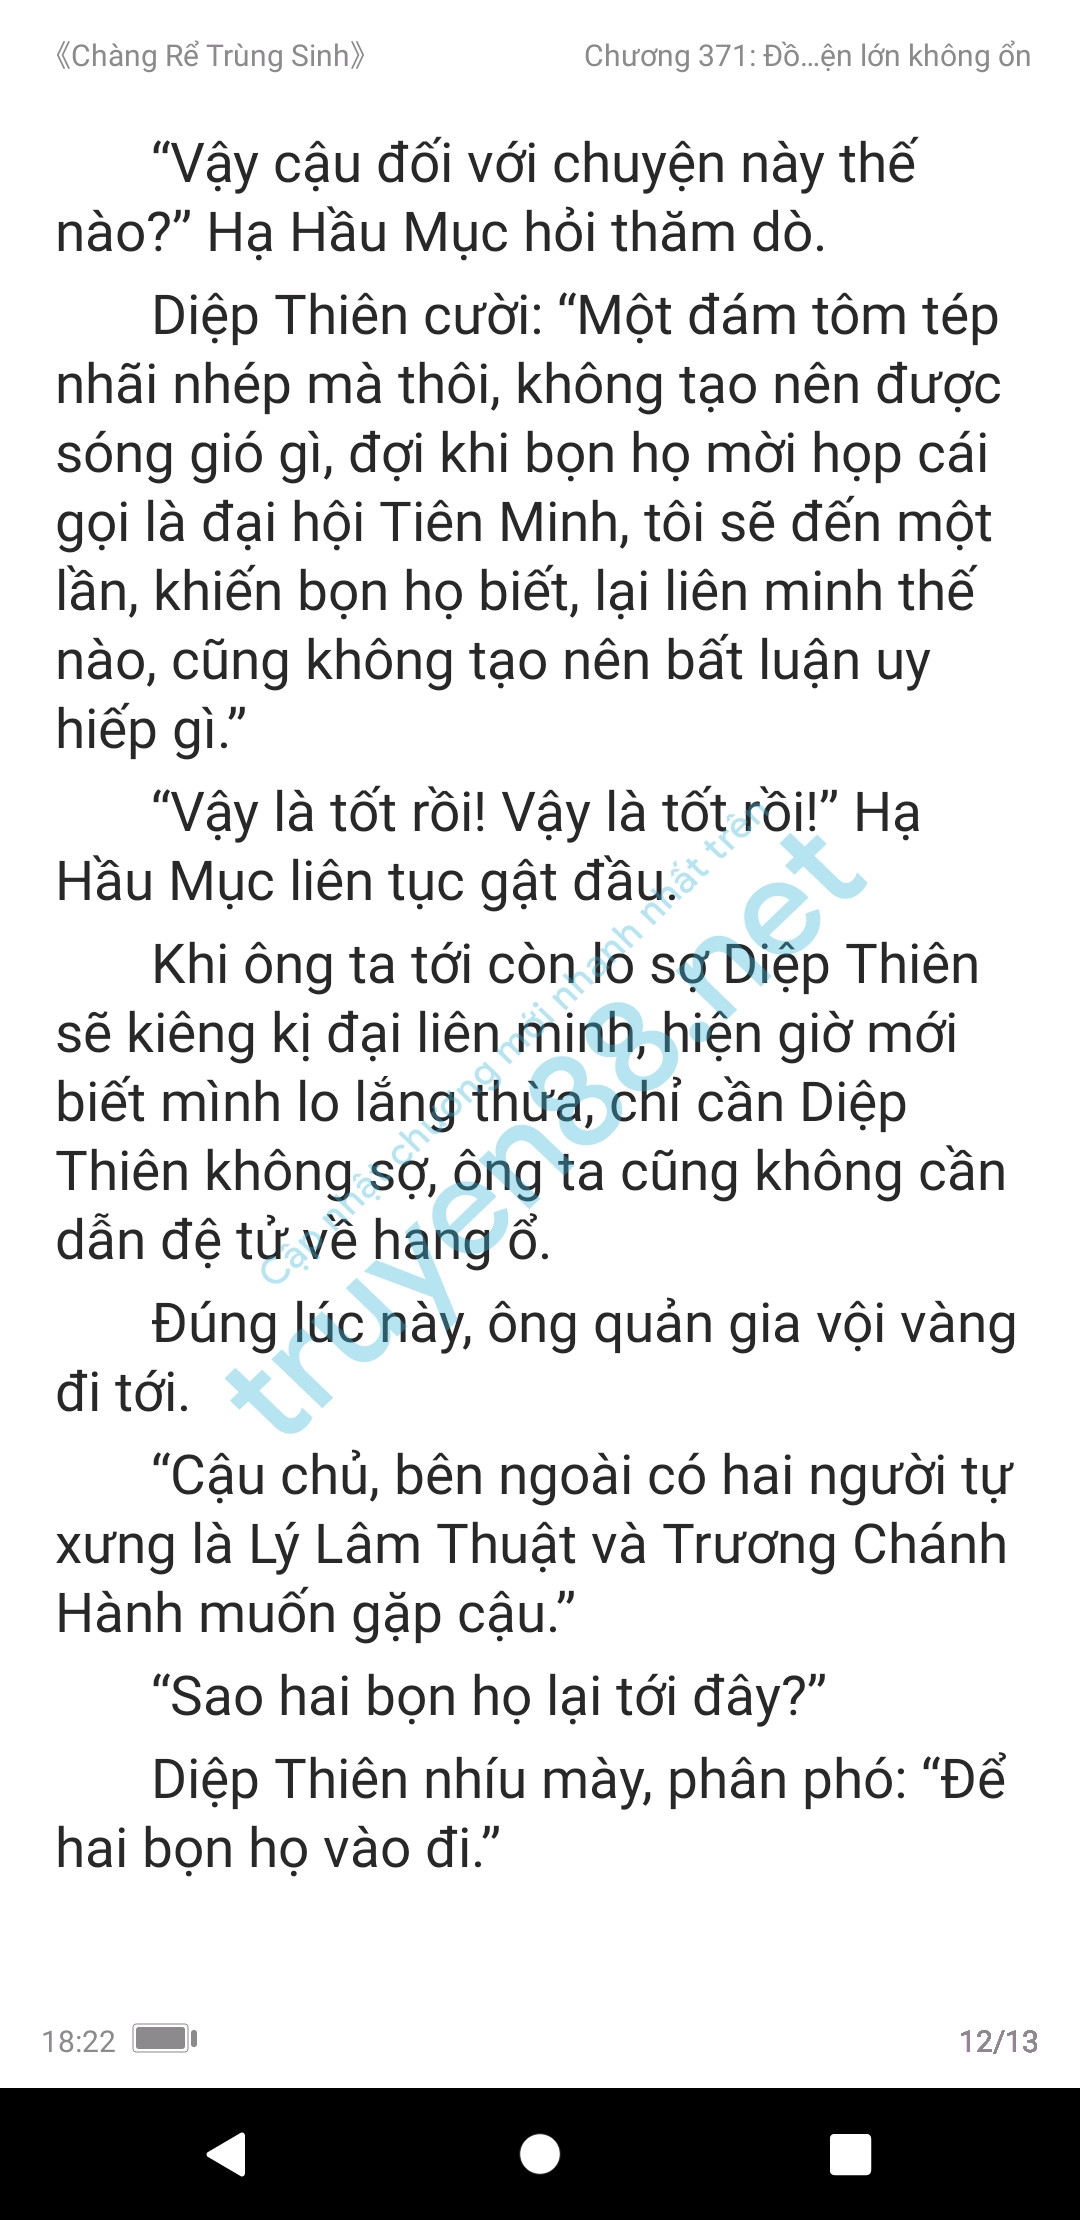 chang-re-trung-sinh-371-1